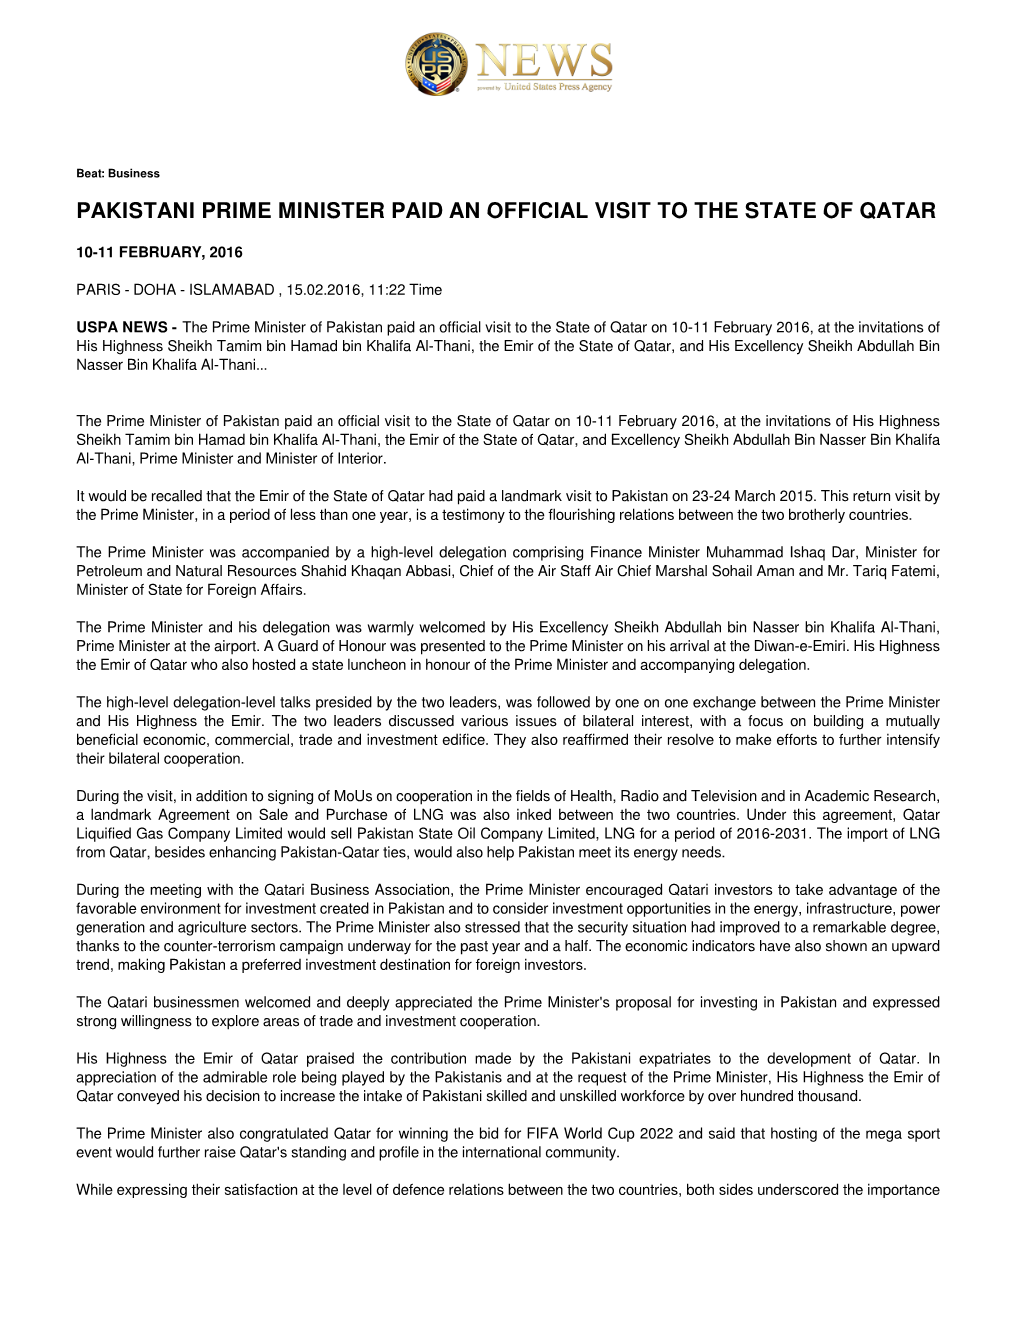 Pakistani Prime Minister Paid an Official Visit to the State of Qatar